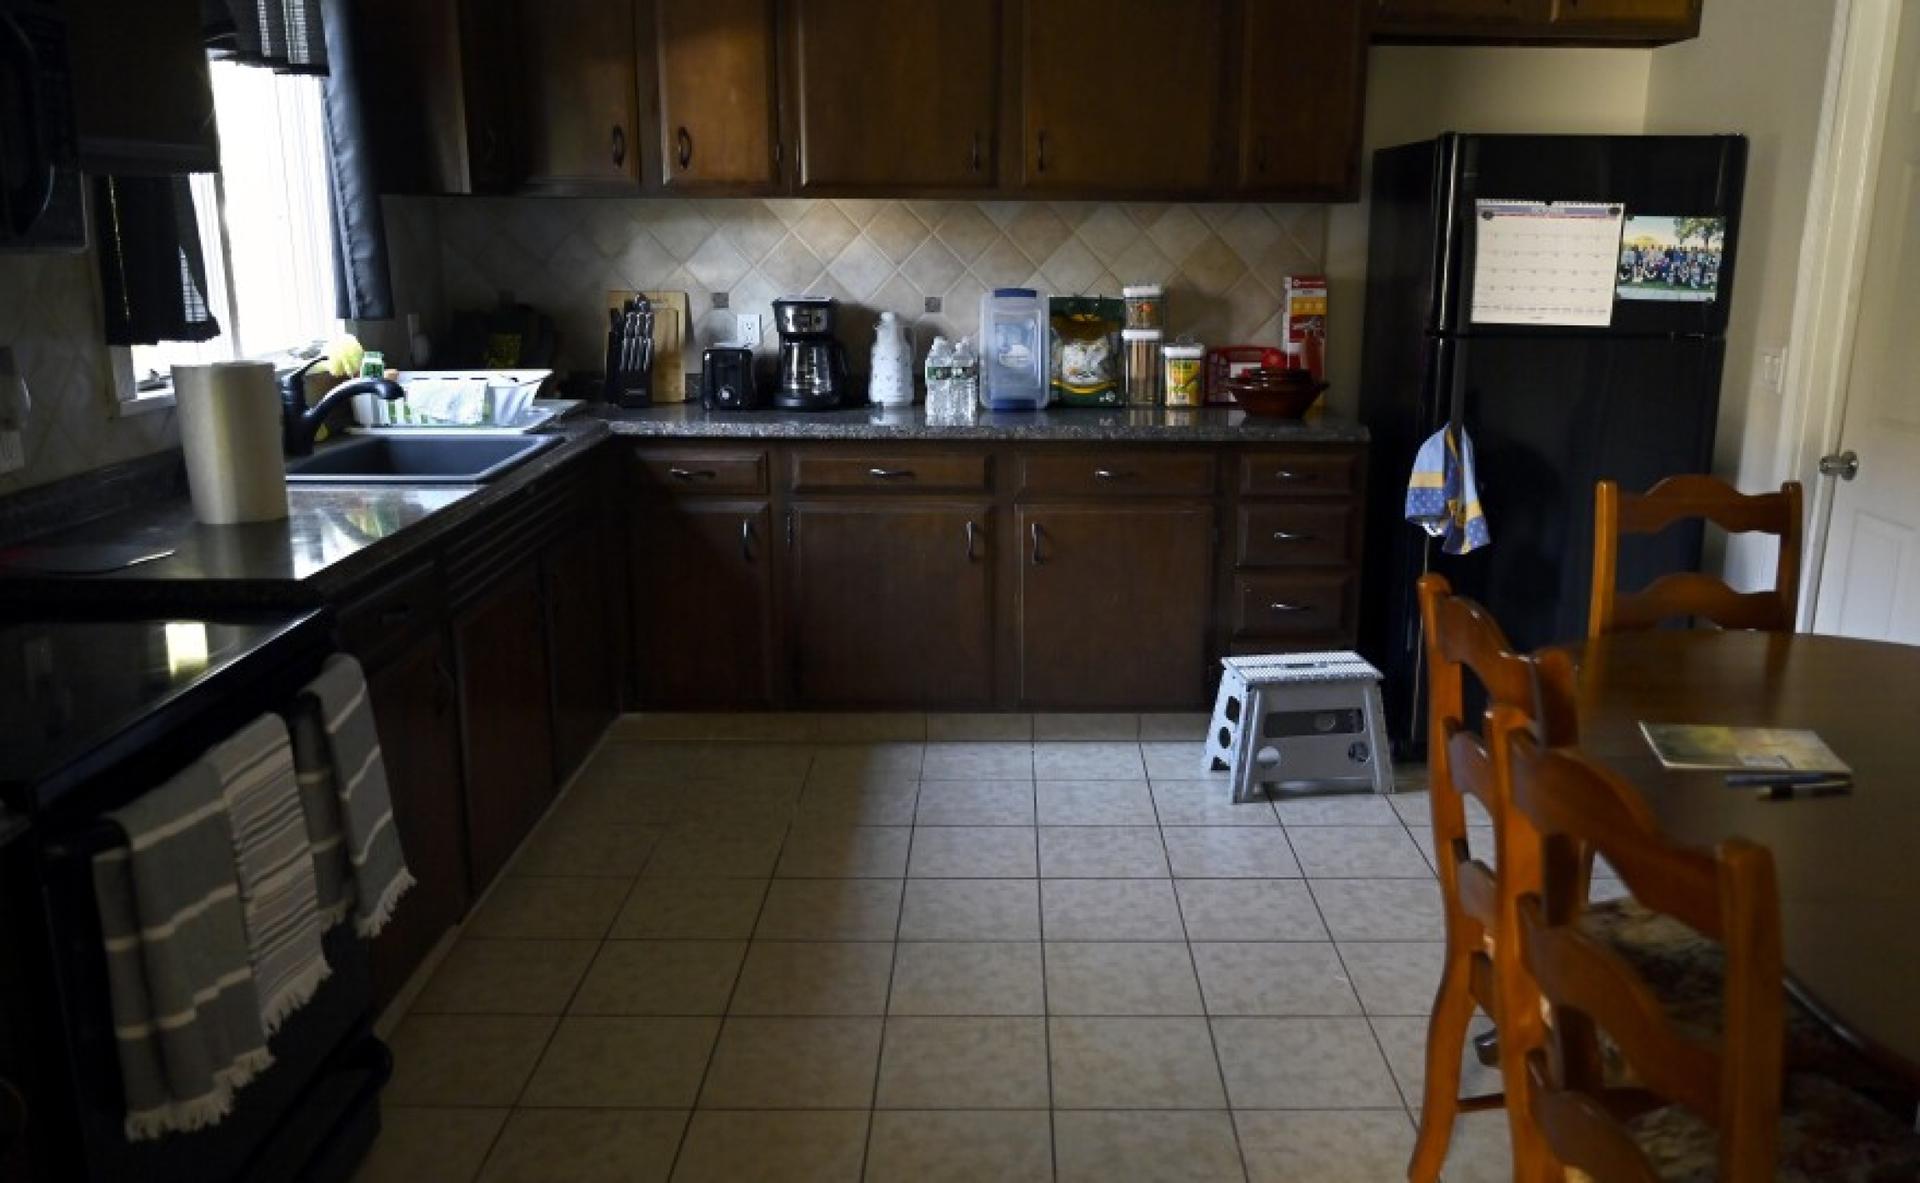 A view of the kitchen of the Middletown apartment